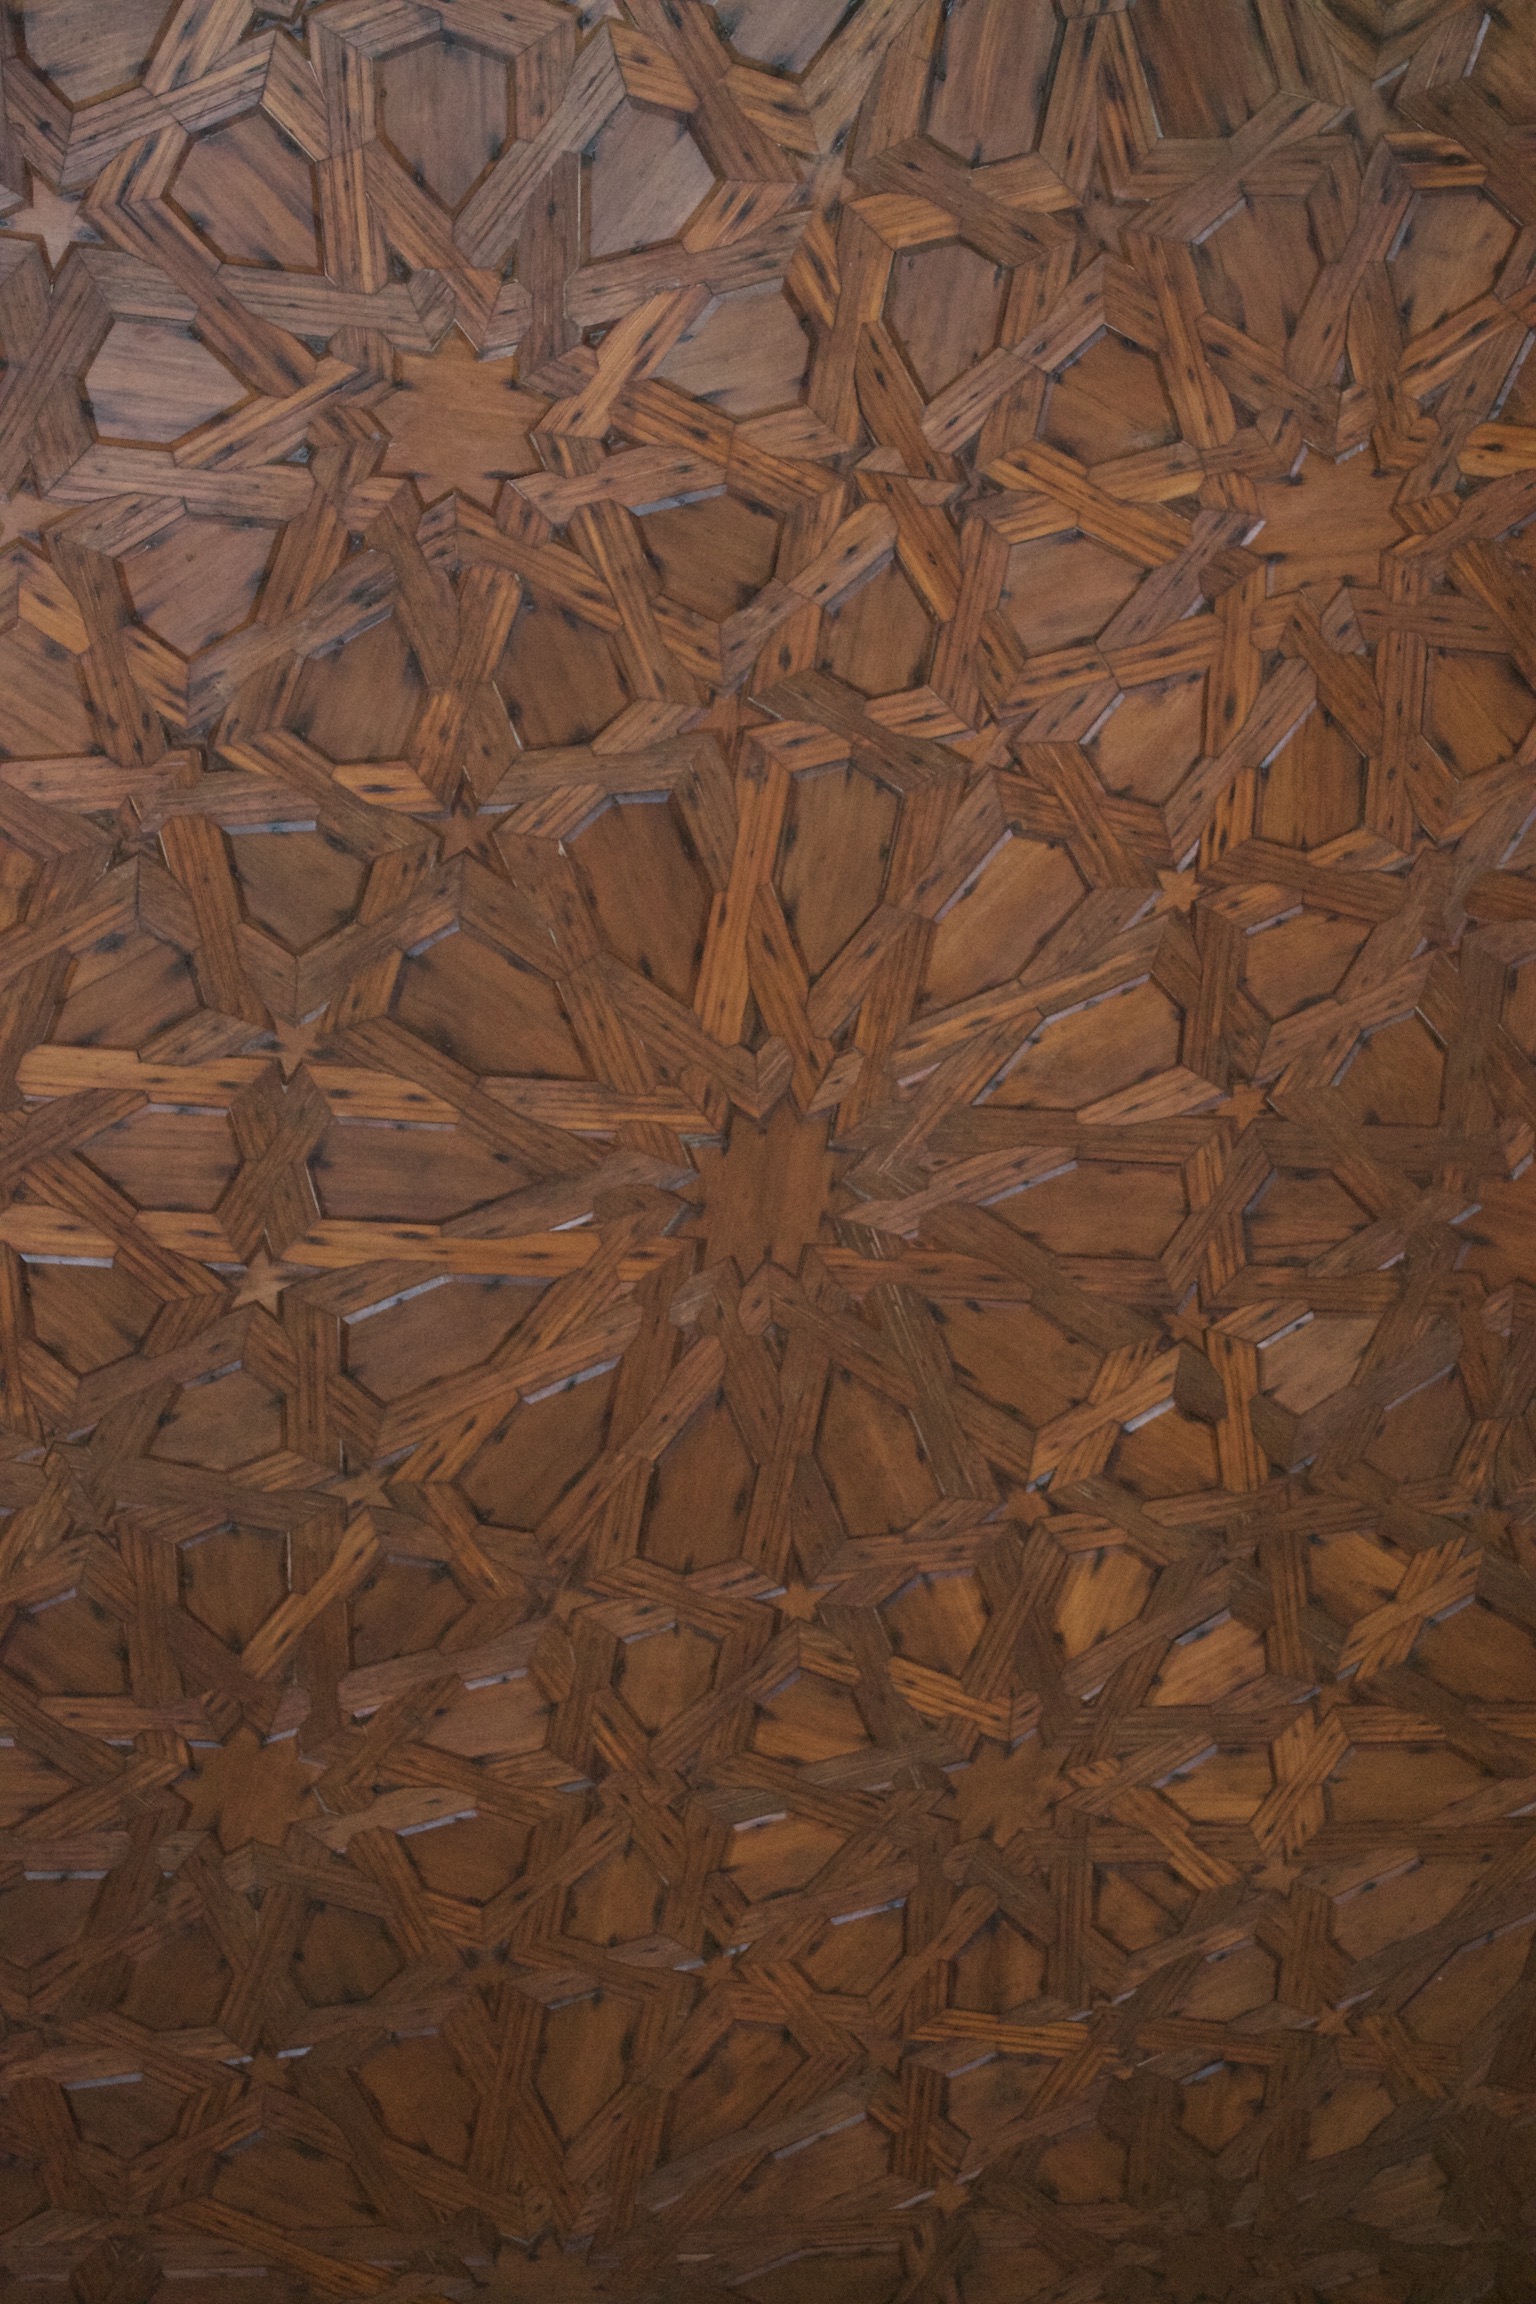 A geometric design of inlaid eight- and five-pointed stars that appear woven in wood.